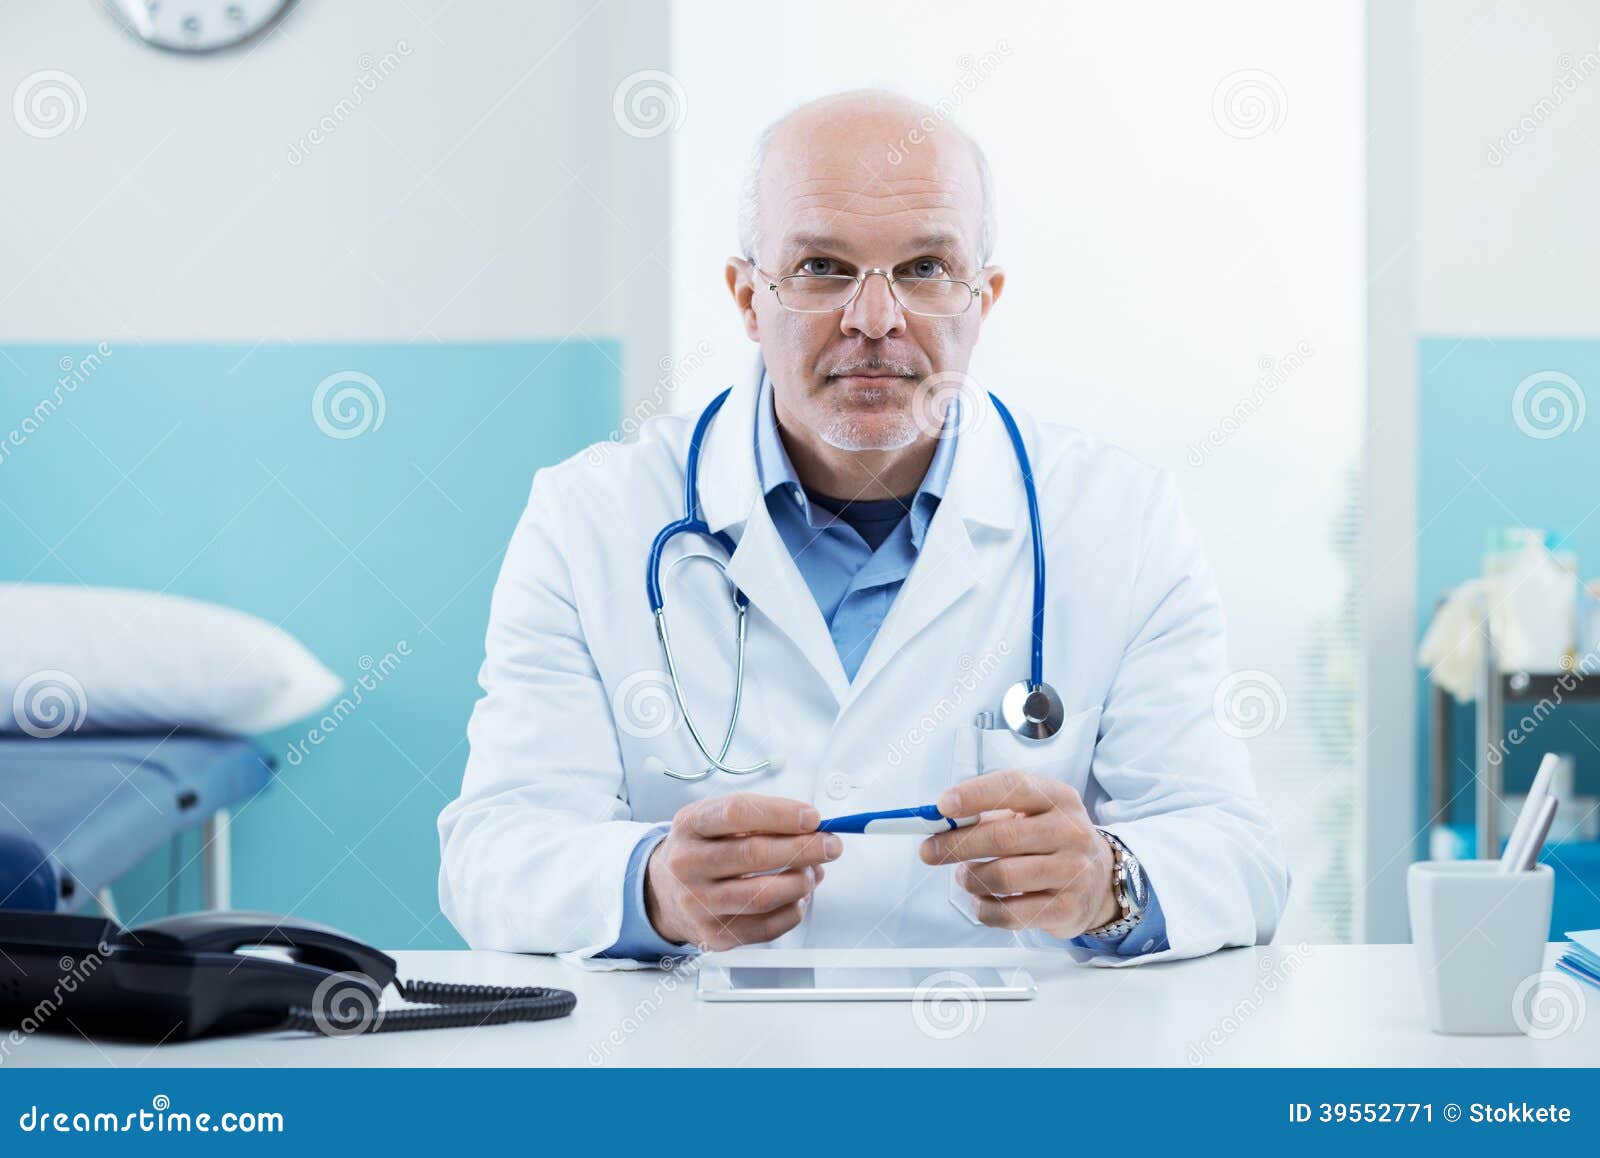 Doctor at work stock image. Image of male, doctor, working - 39552771